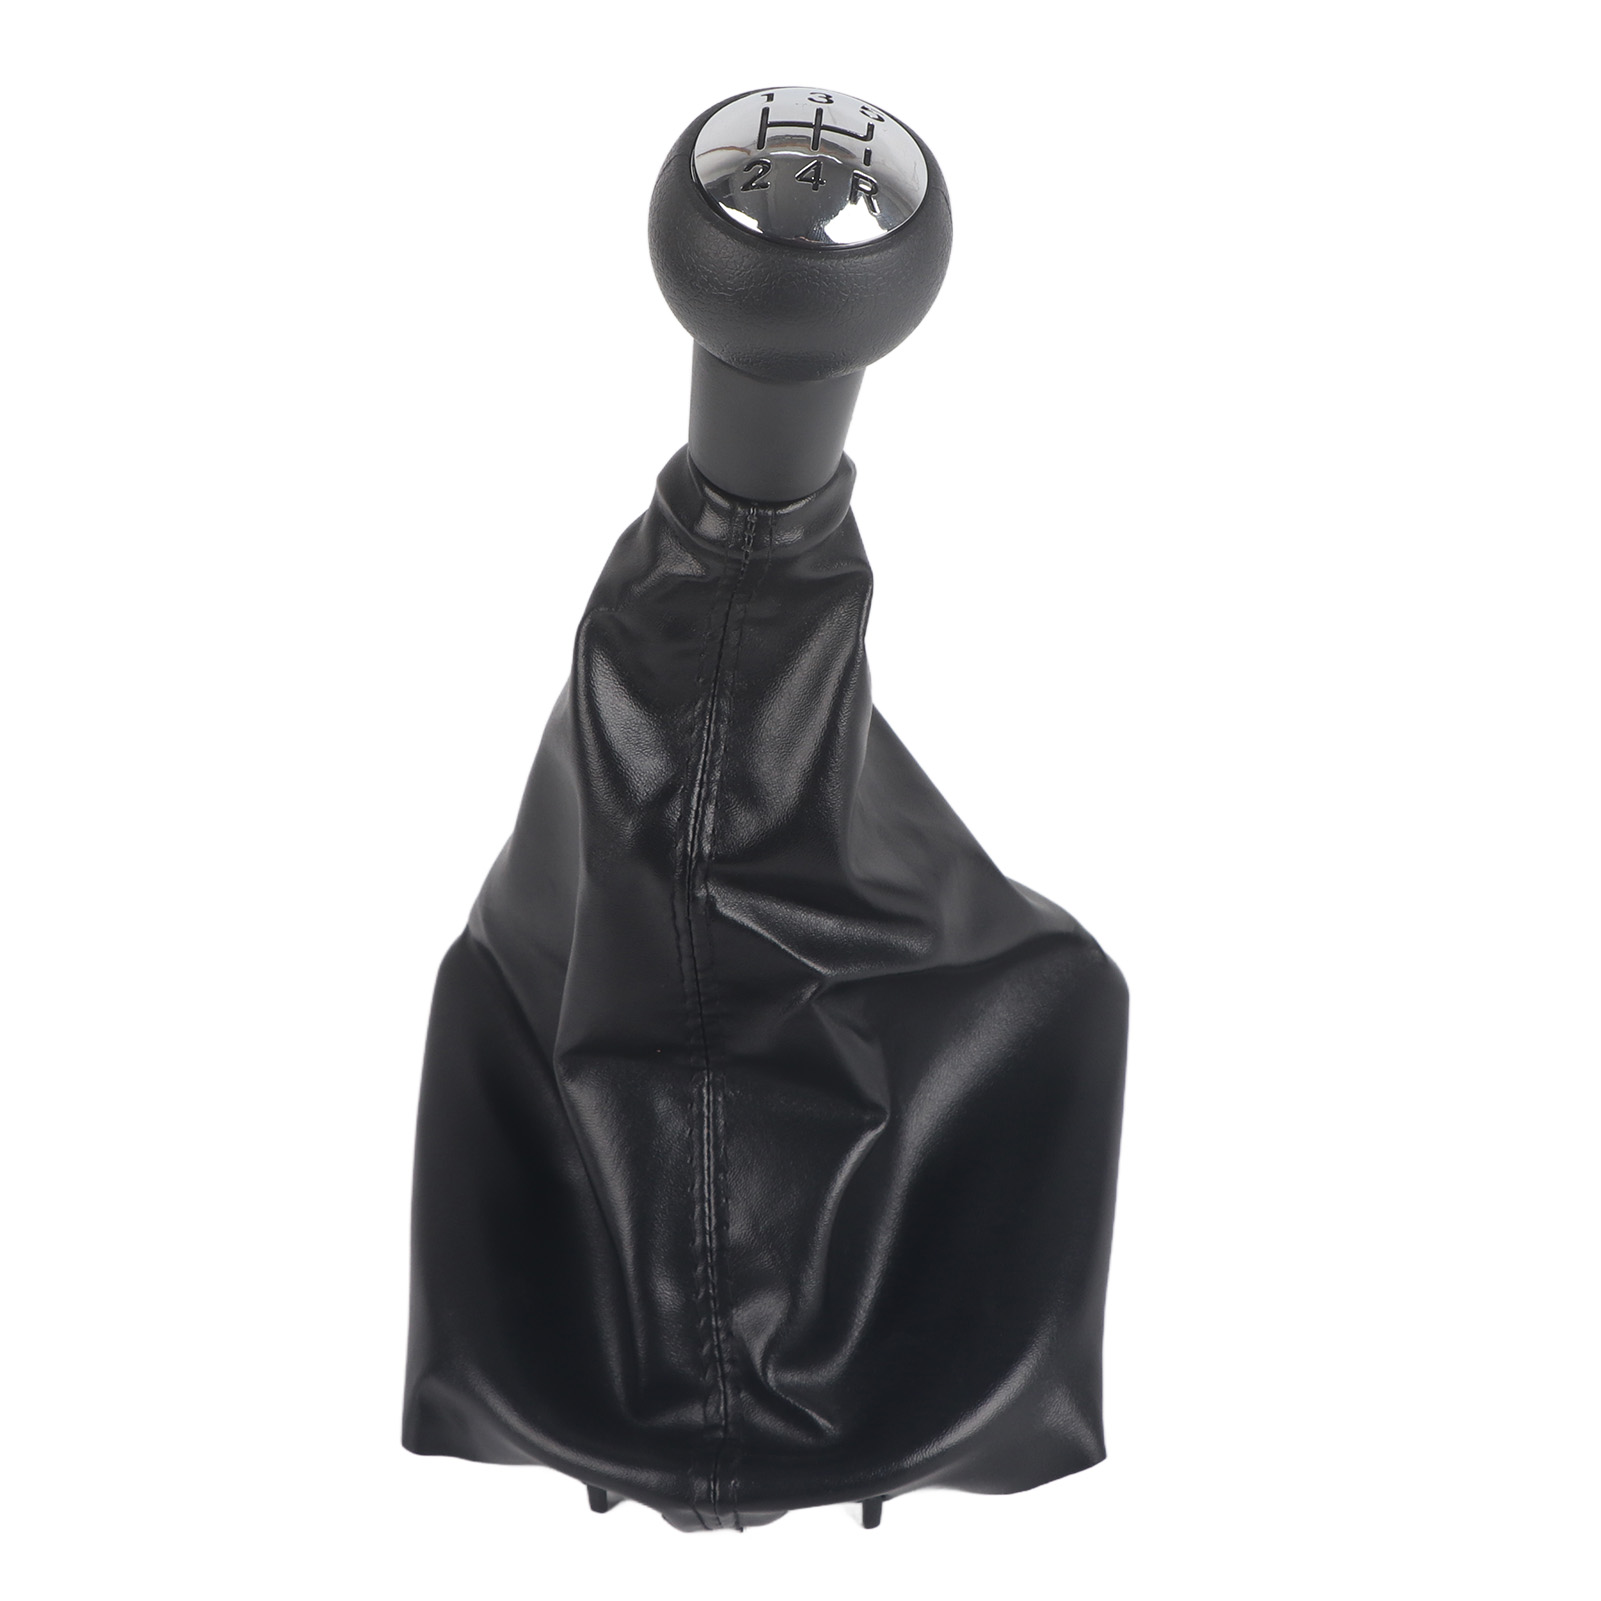 Leather Gear Shift Knob,5 Speed Gear Shift Stick Knob Dust-proof Cover Gaiter Boot Leather for Peugeot 207/307/406, Black Gear Shift